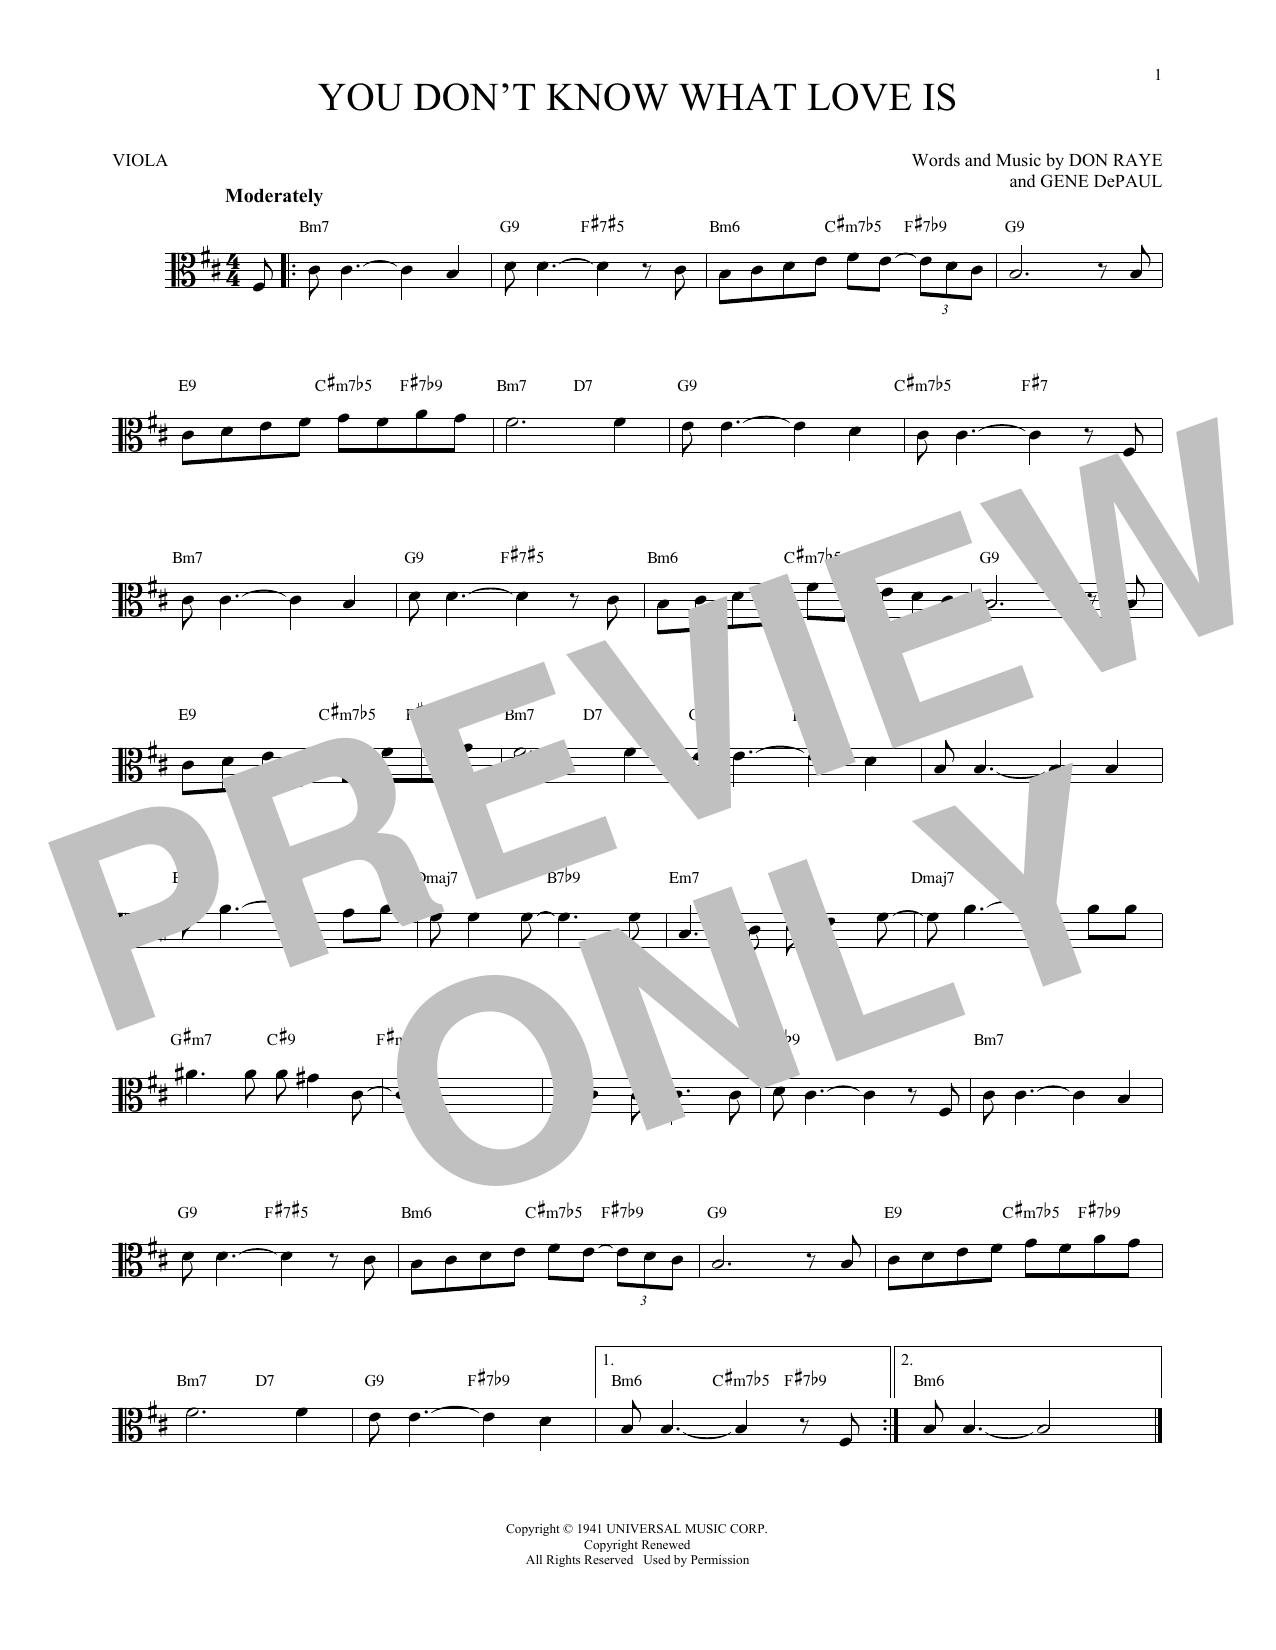 Download Don Raye You Don't Know What Love Is Sheet Music